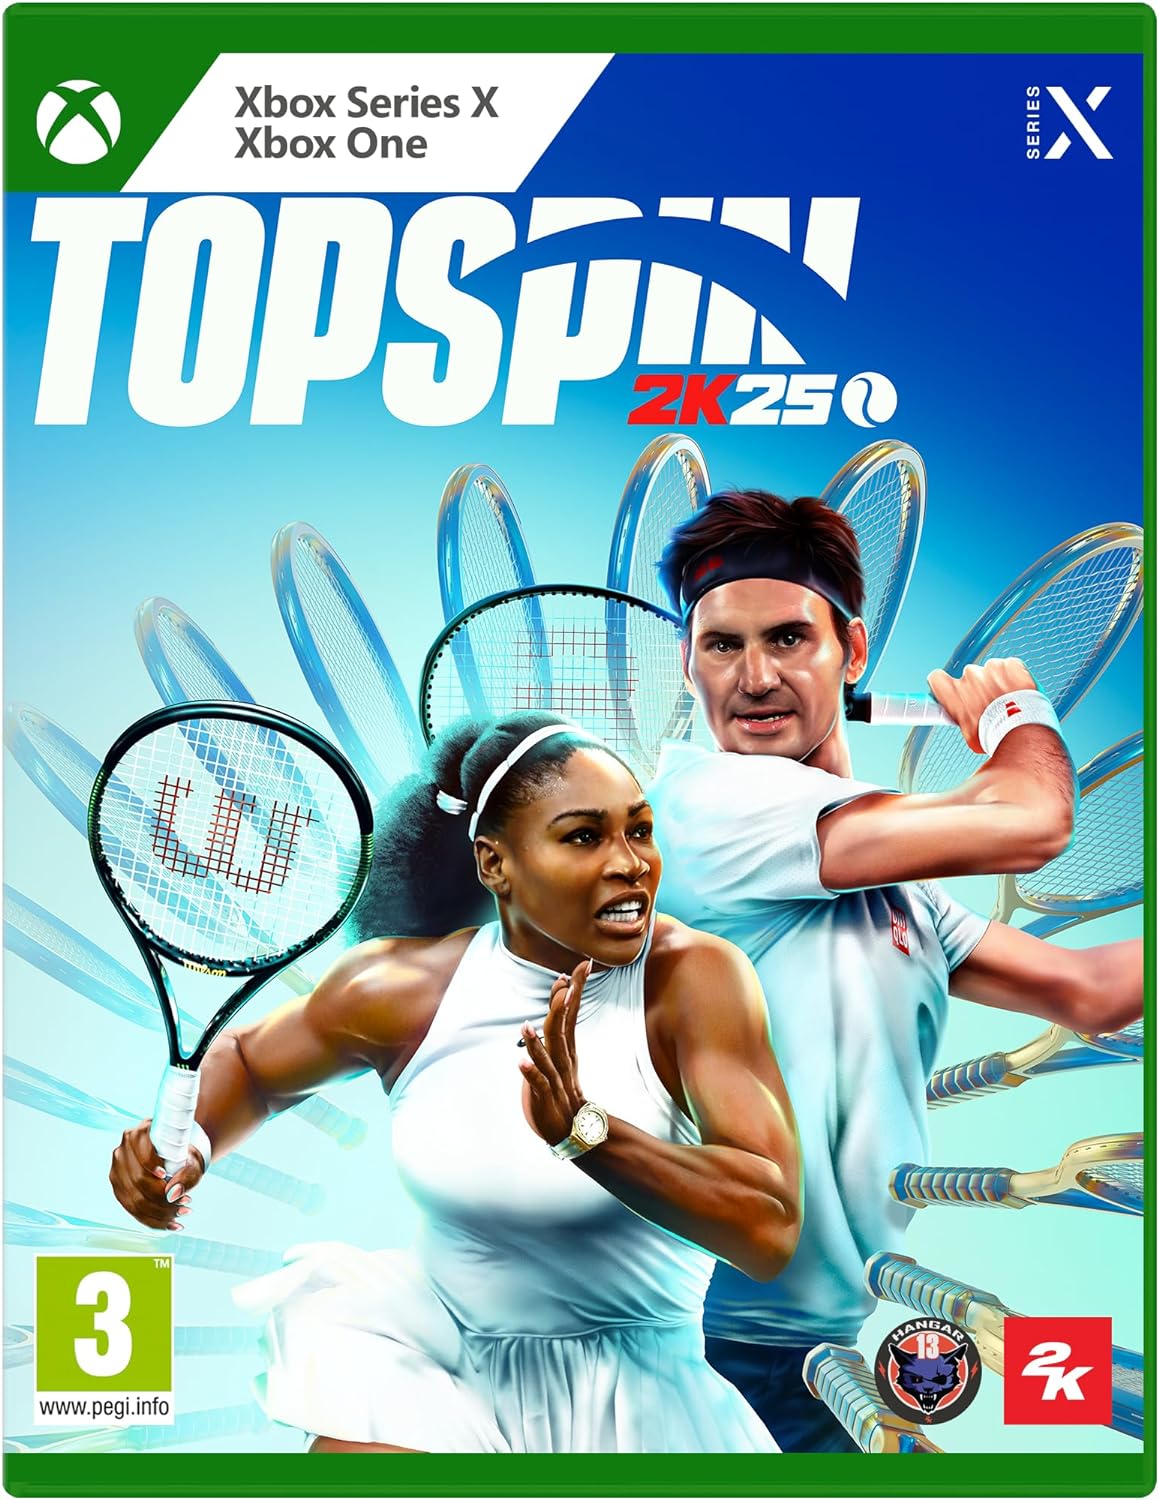 TopSpin 2K25 Grand Slam Edition Digital Download Key (Xbox One/Series X): Europe